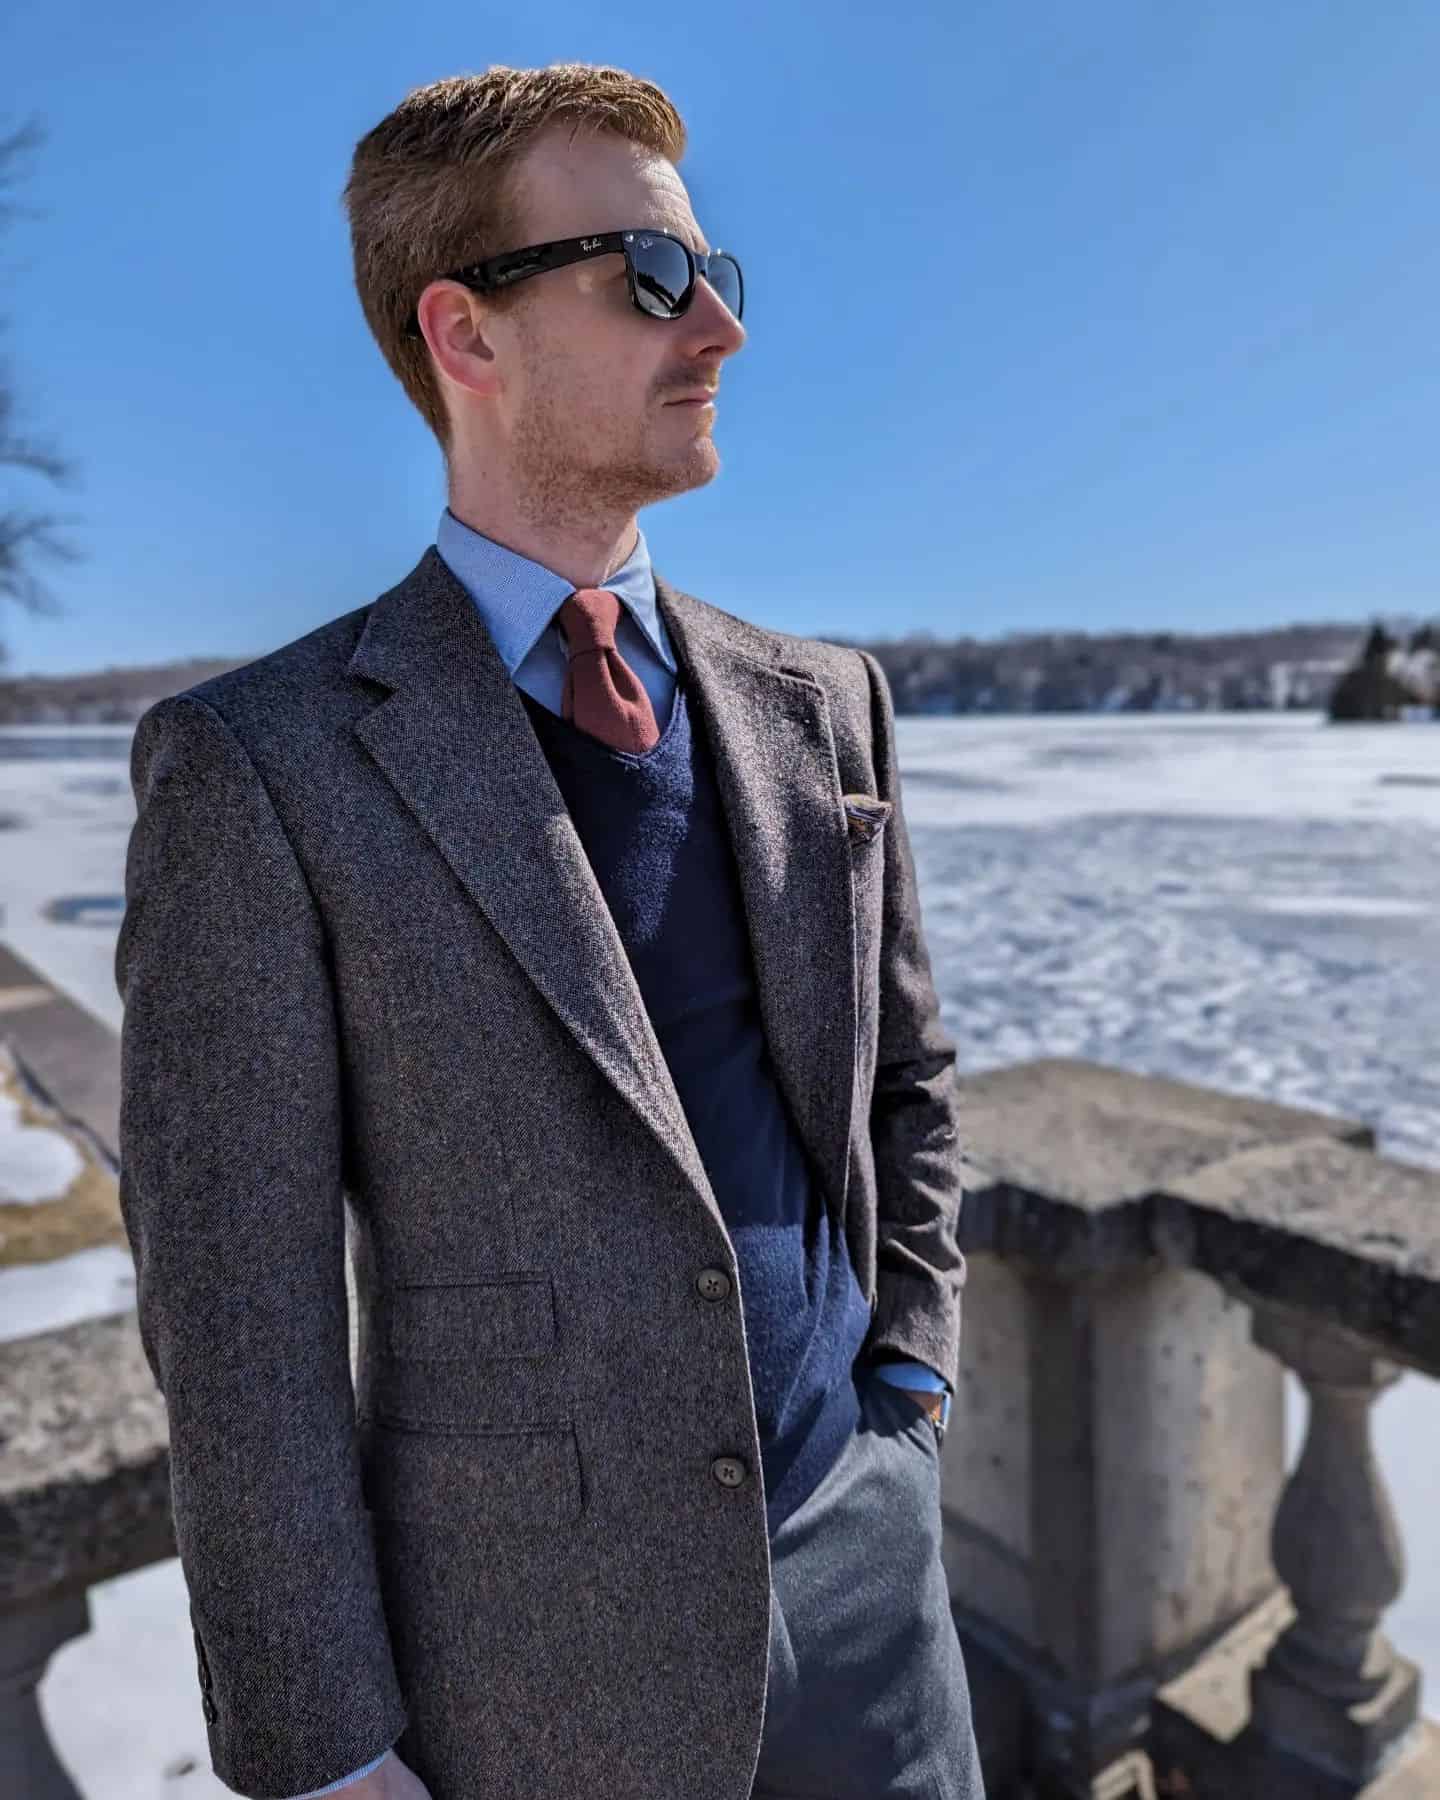 man with sunglasses wearing a tweed suit jacket